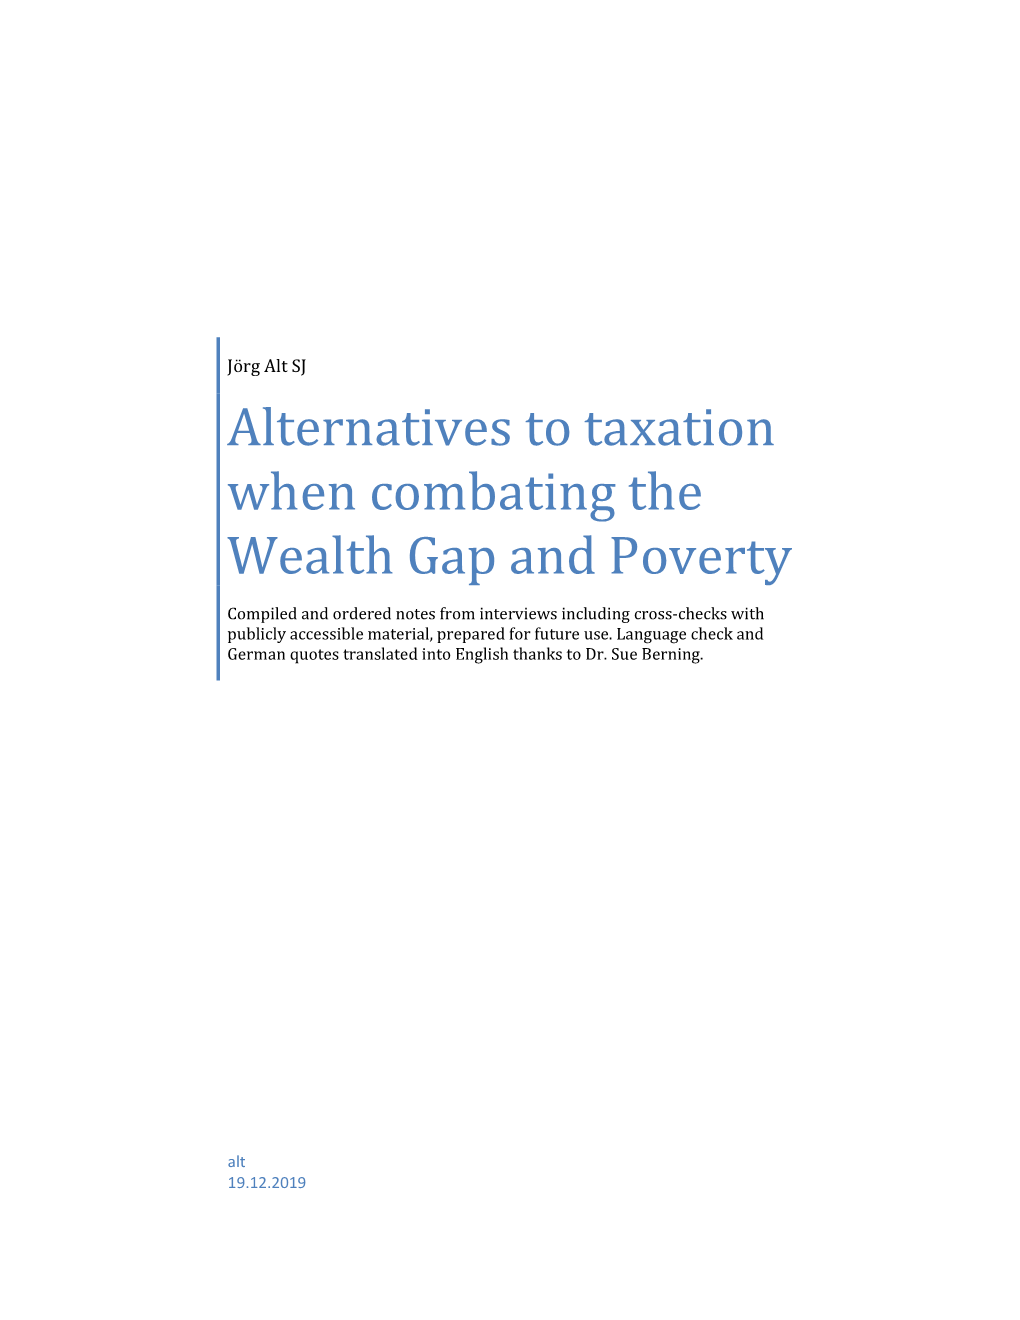 Alternatives to Taxation When Combating the Wealth Gap and Poverty